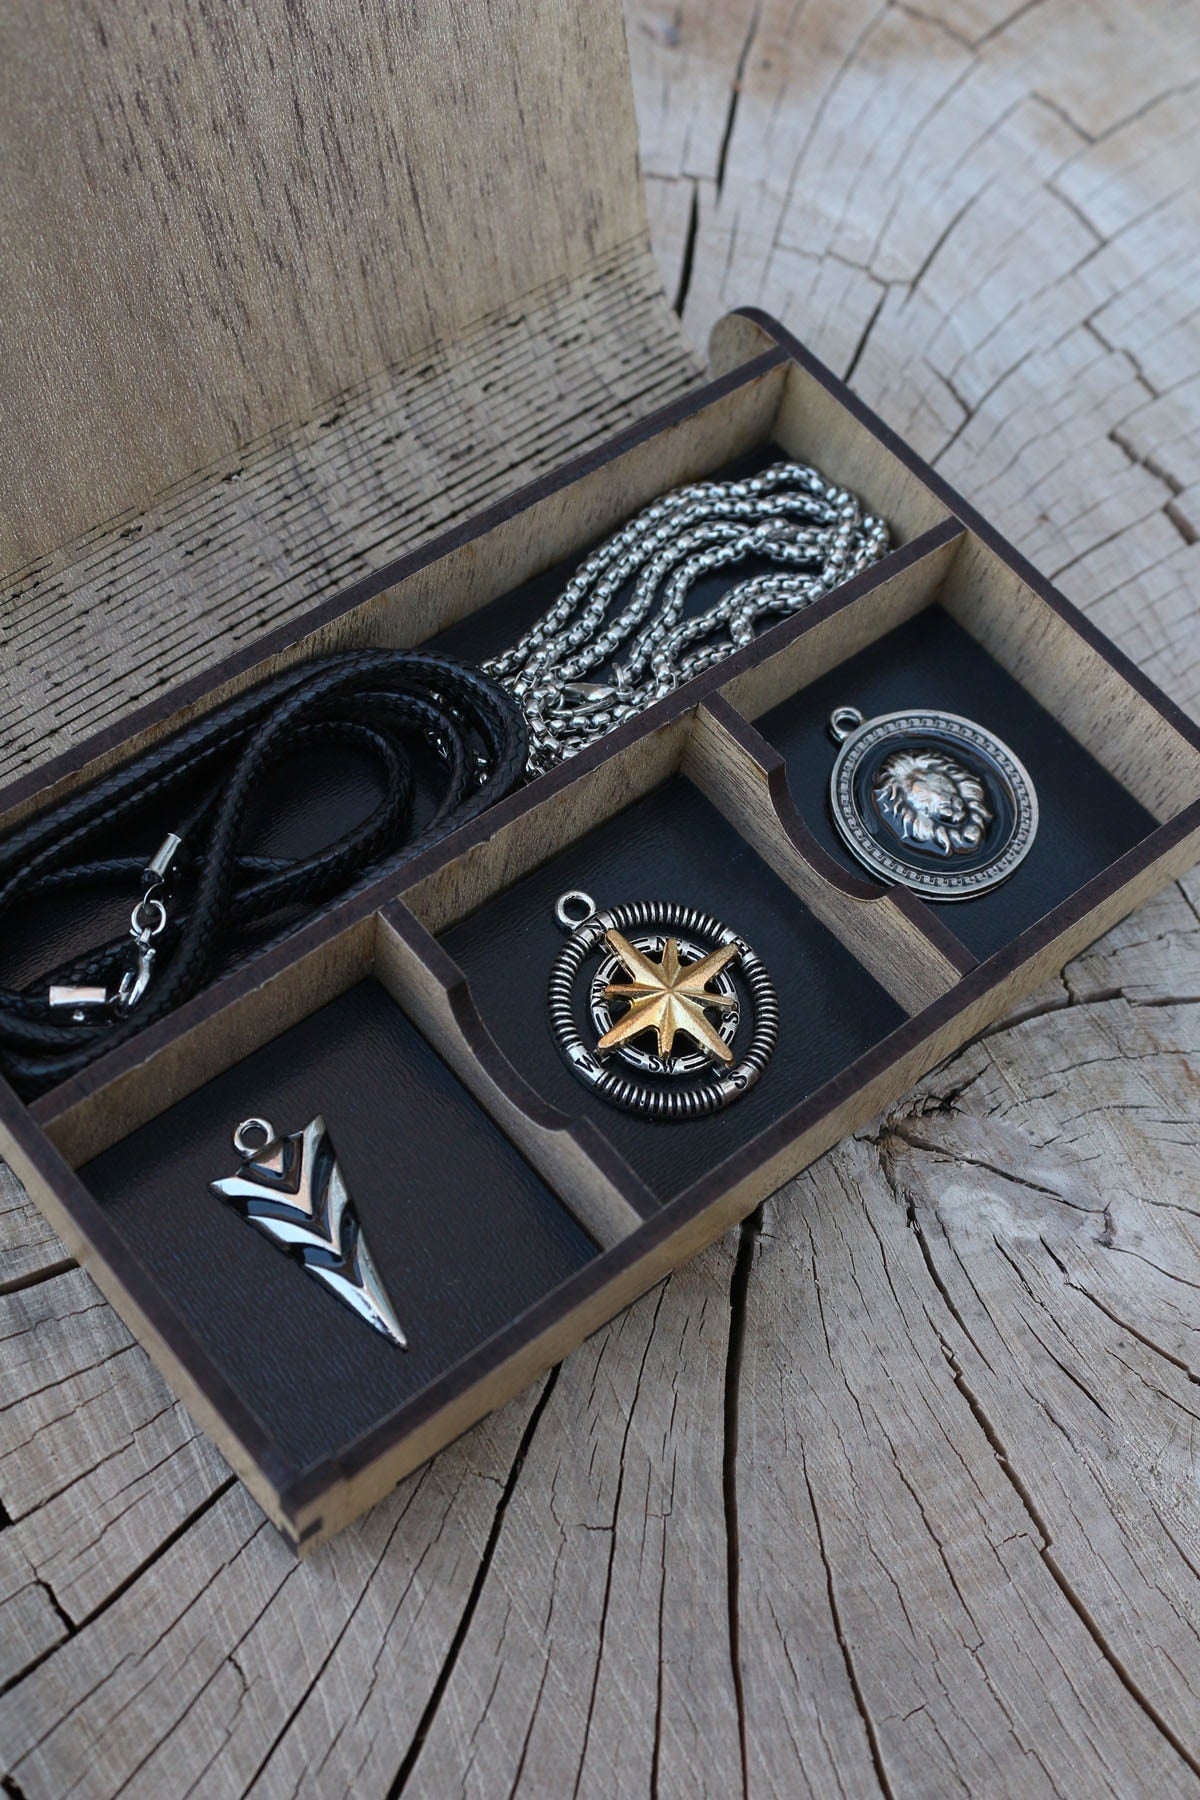 Necklace Set Wooden Special Gift Boxed Triagle Arrow, Pole Compass And Lion Imprint Rope And Chain